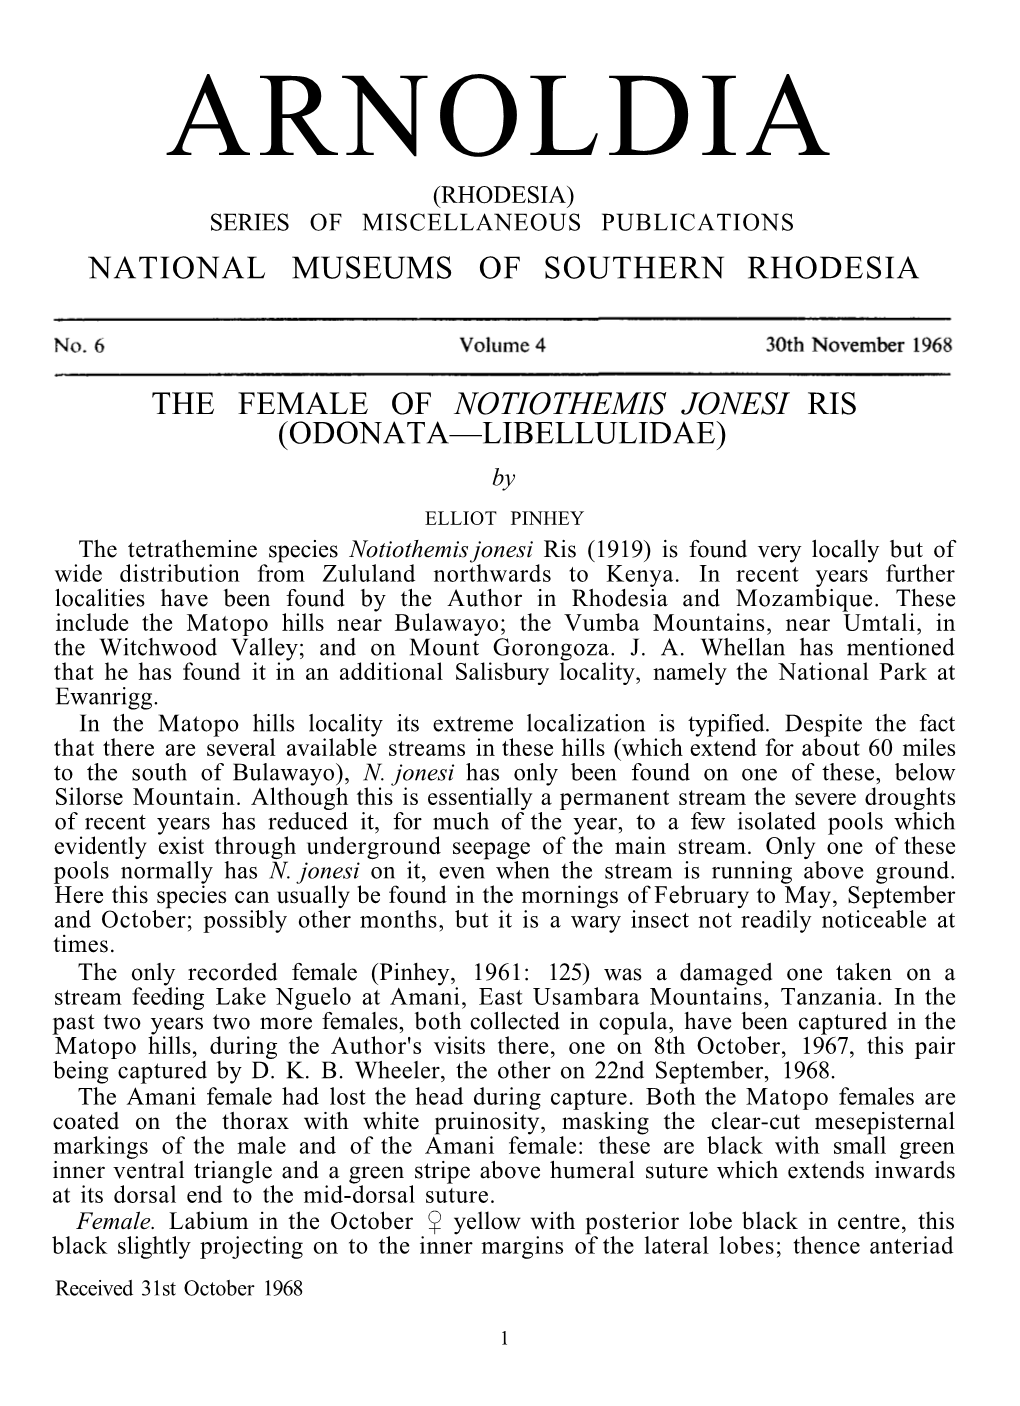 Arnoldia (Rhodesia) Series of Miscellaneous Publications National Museums of Southern Rhodesia